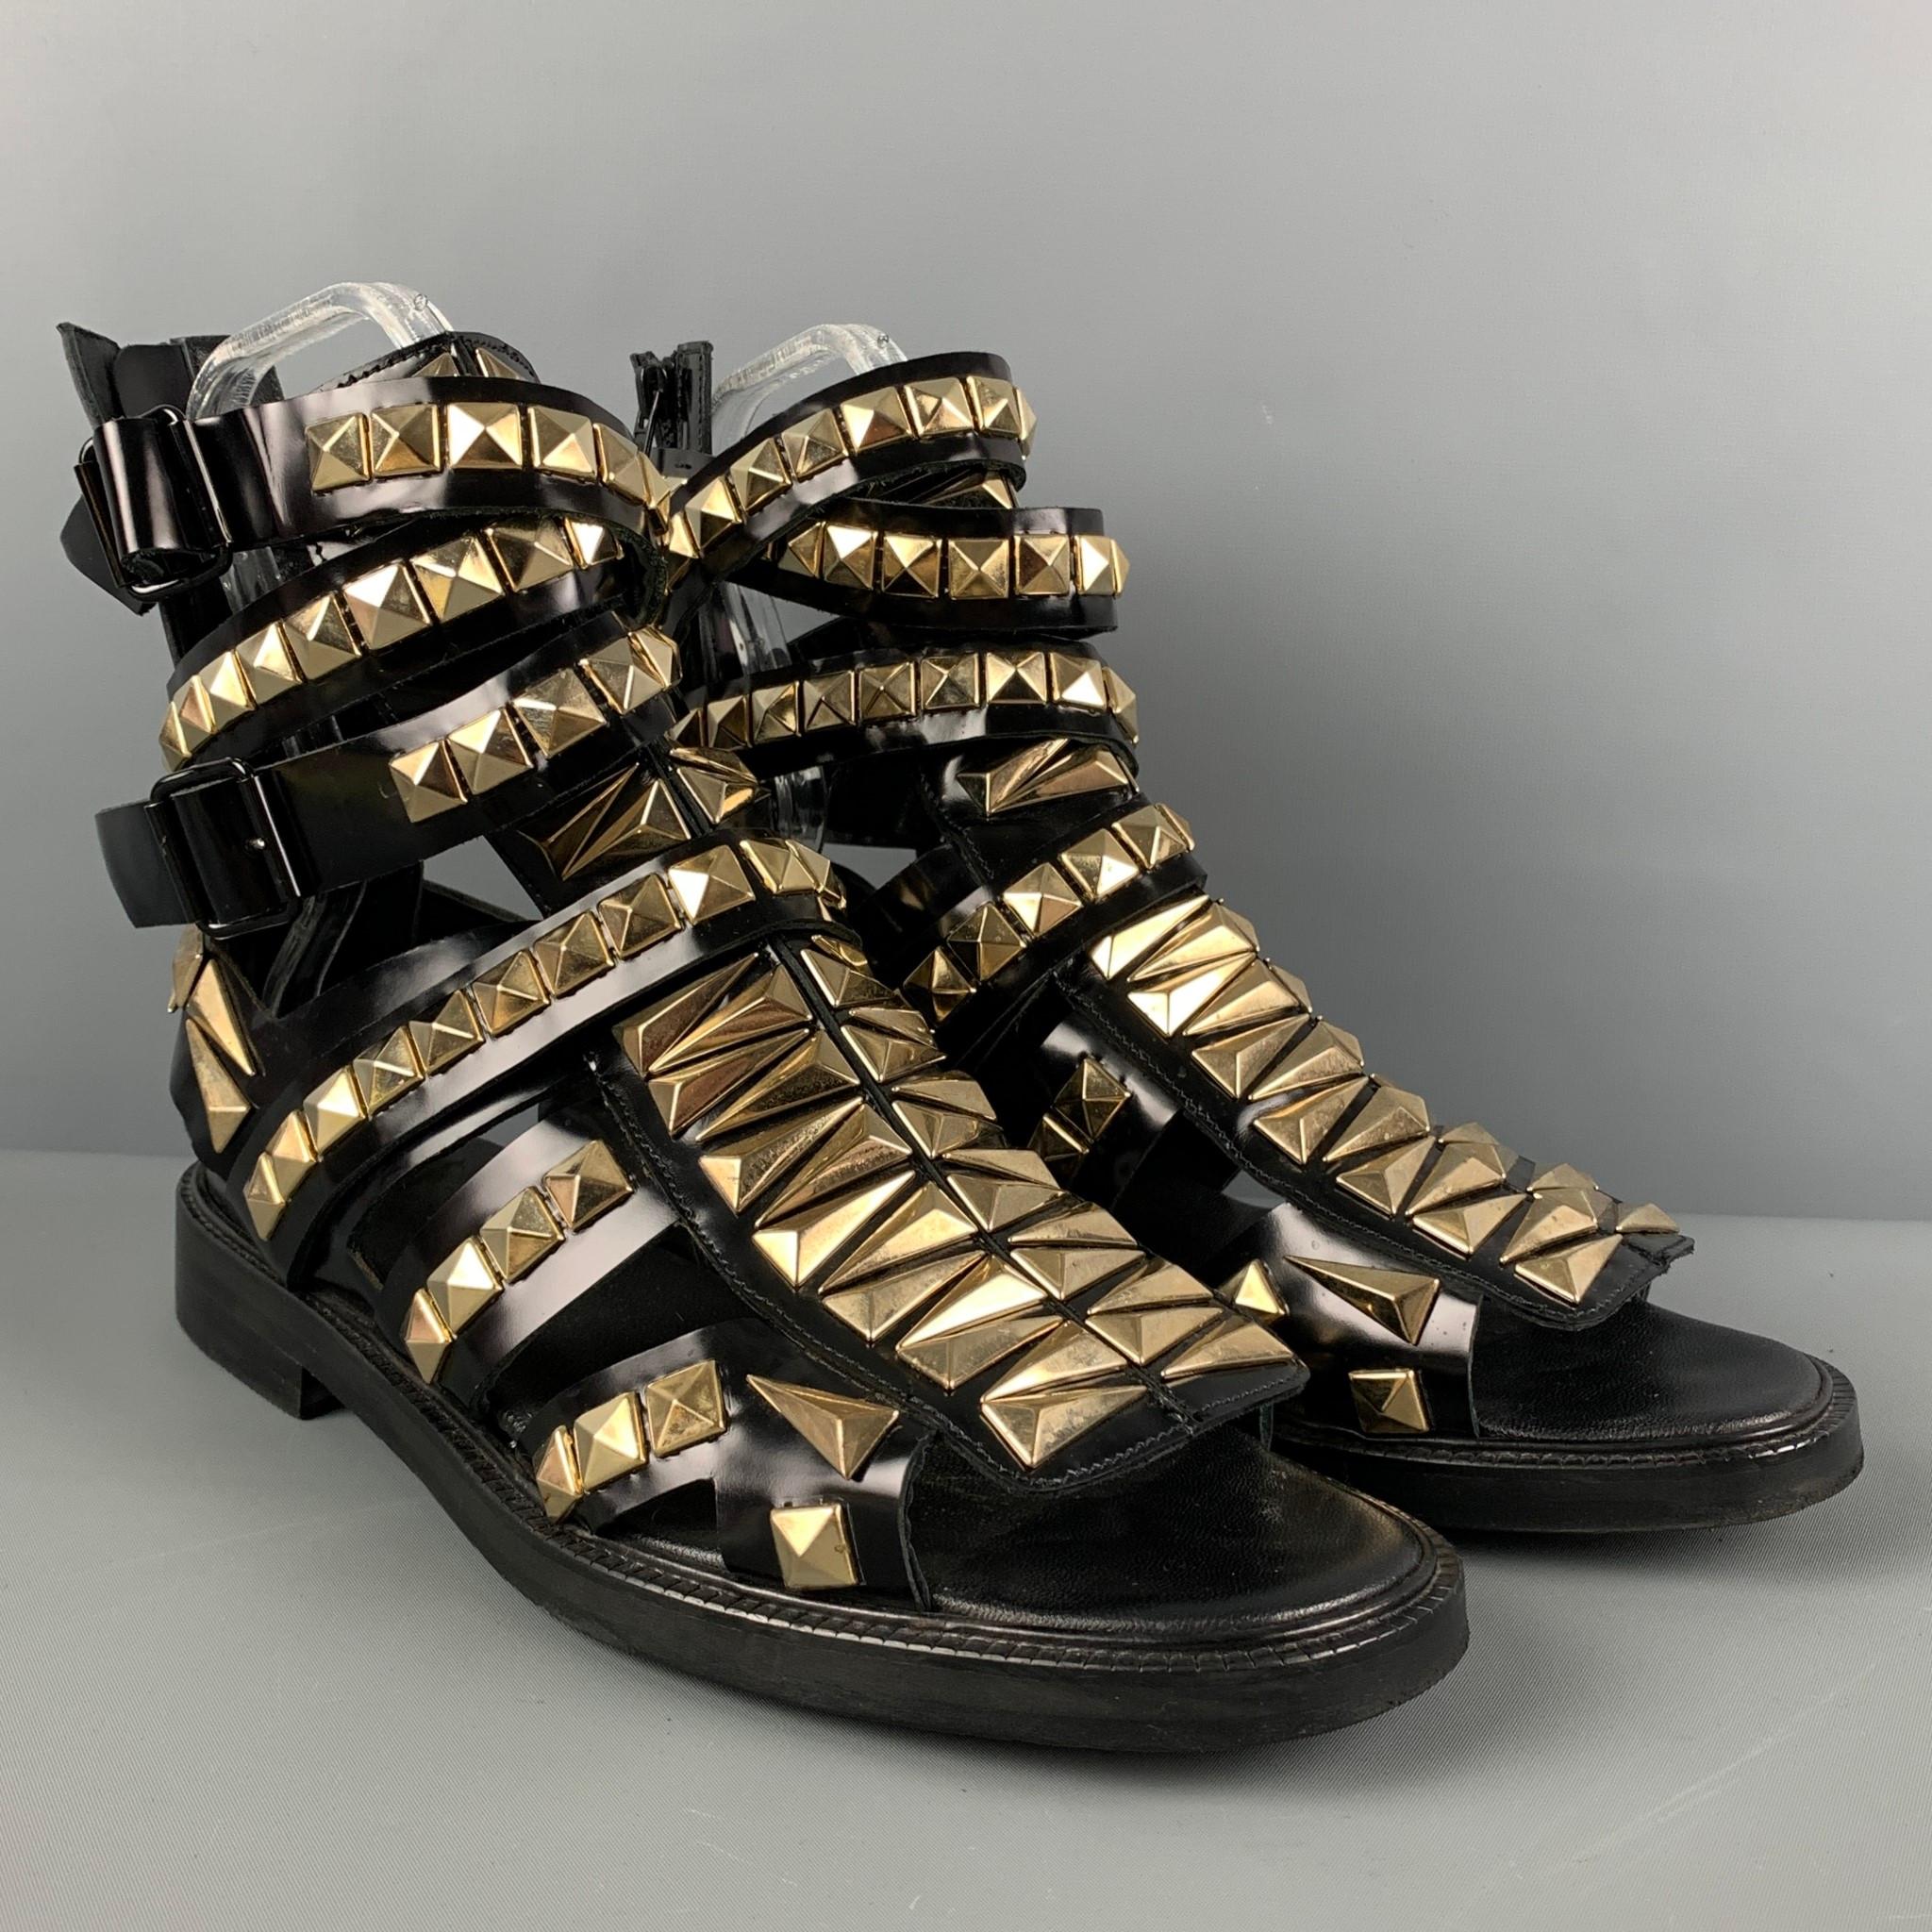 GIVENCHY SS2010 sandals comes in a black leather featuring a gladiator style, gold tone studded details throughout, and a wrap around ankle strap closure. Made in Italy. 

Very Good Pre-Owned Condition.
Marked: 44

Outsole: 12 in. x 4.5 in.